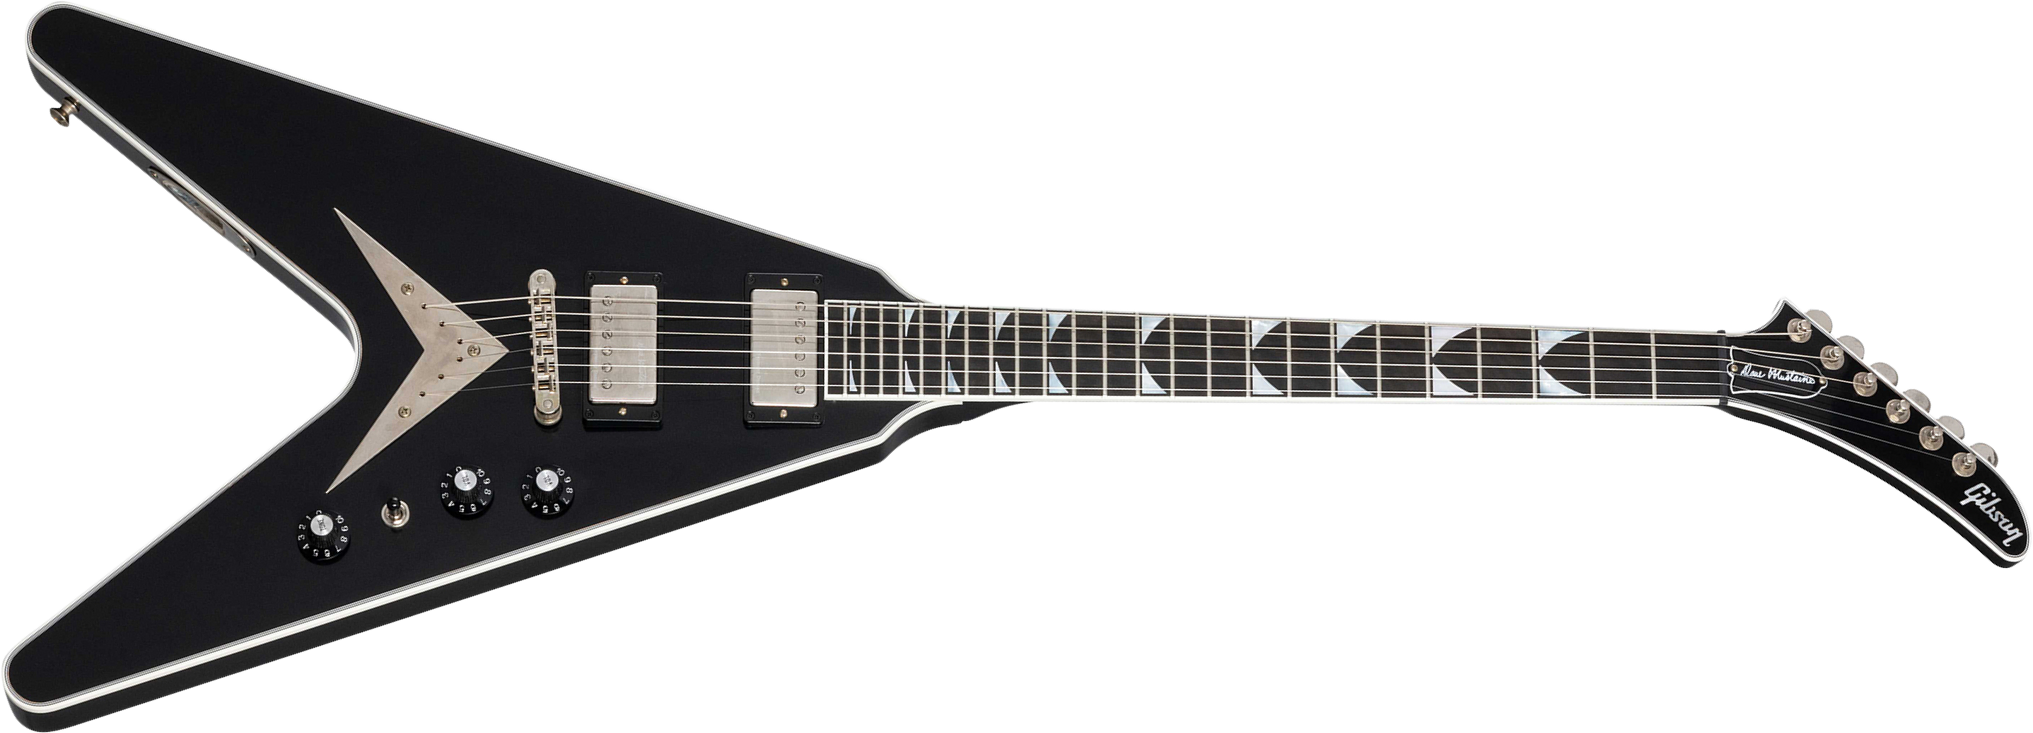 Gibson Custom Shop Dave Mustaine Flying V Exp Ltd Signature 2h Ht Eb - Vos Ebony - Metal electric guitar - Main picture